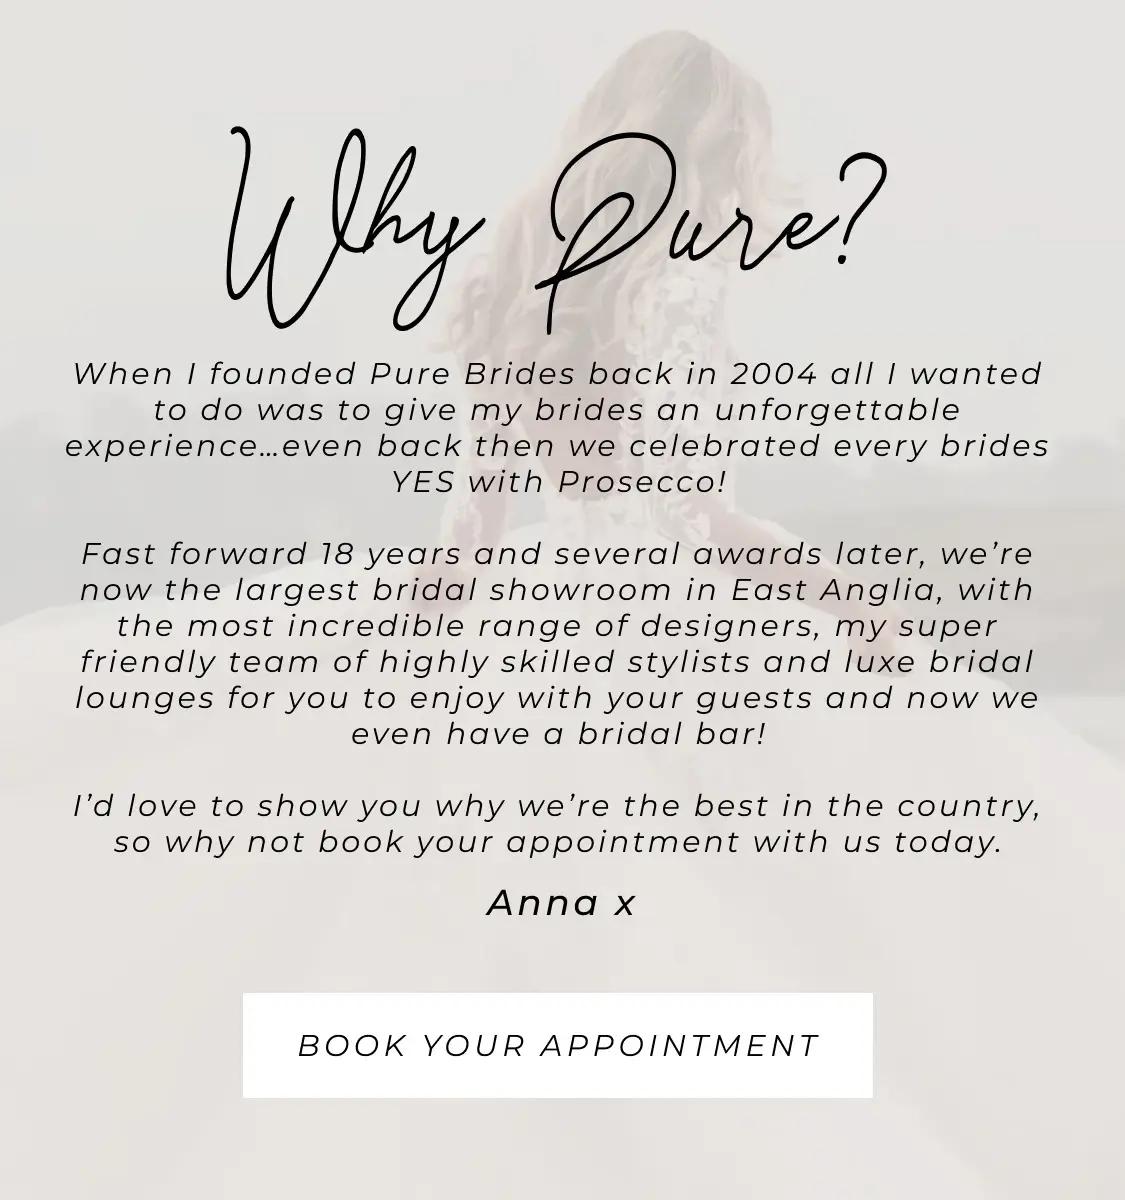 Book an Appointment at Pure Brides in Norwich UK